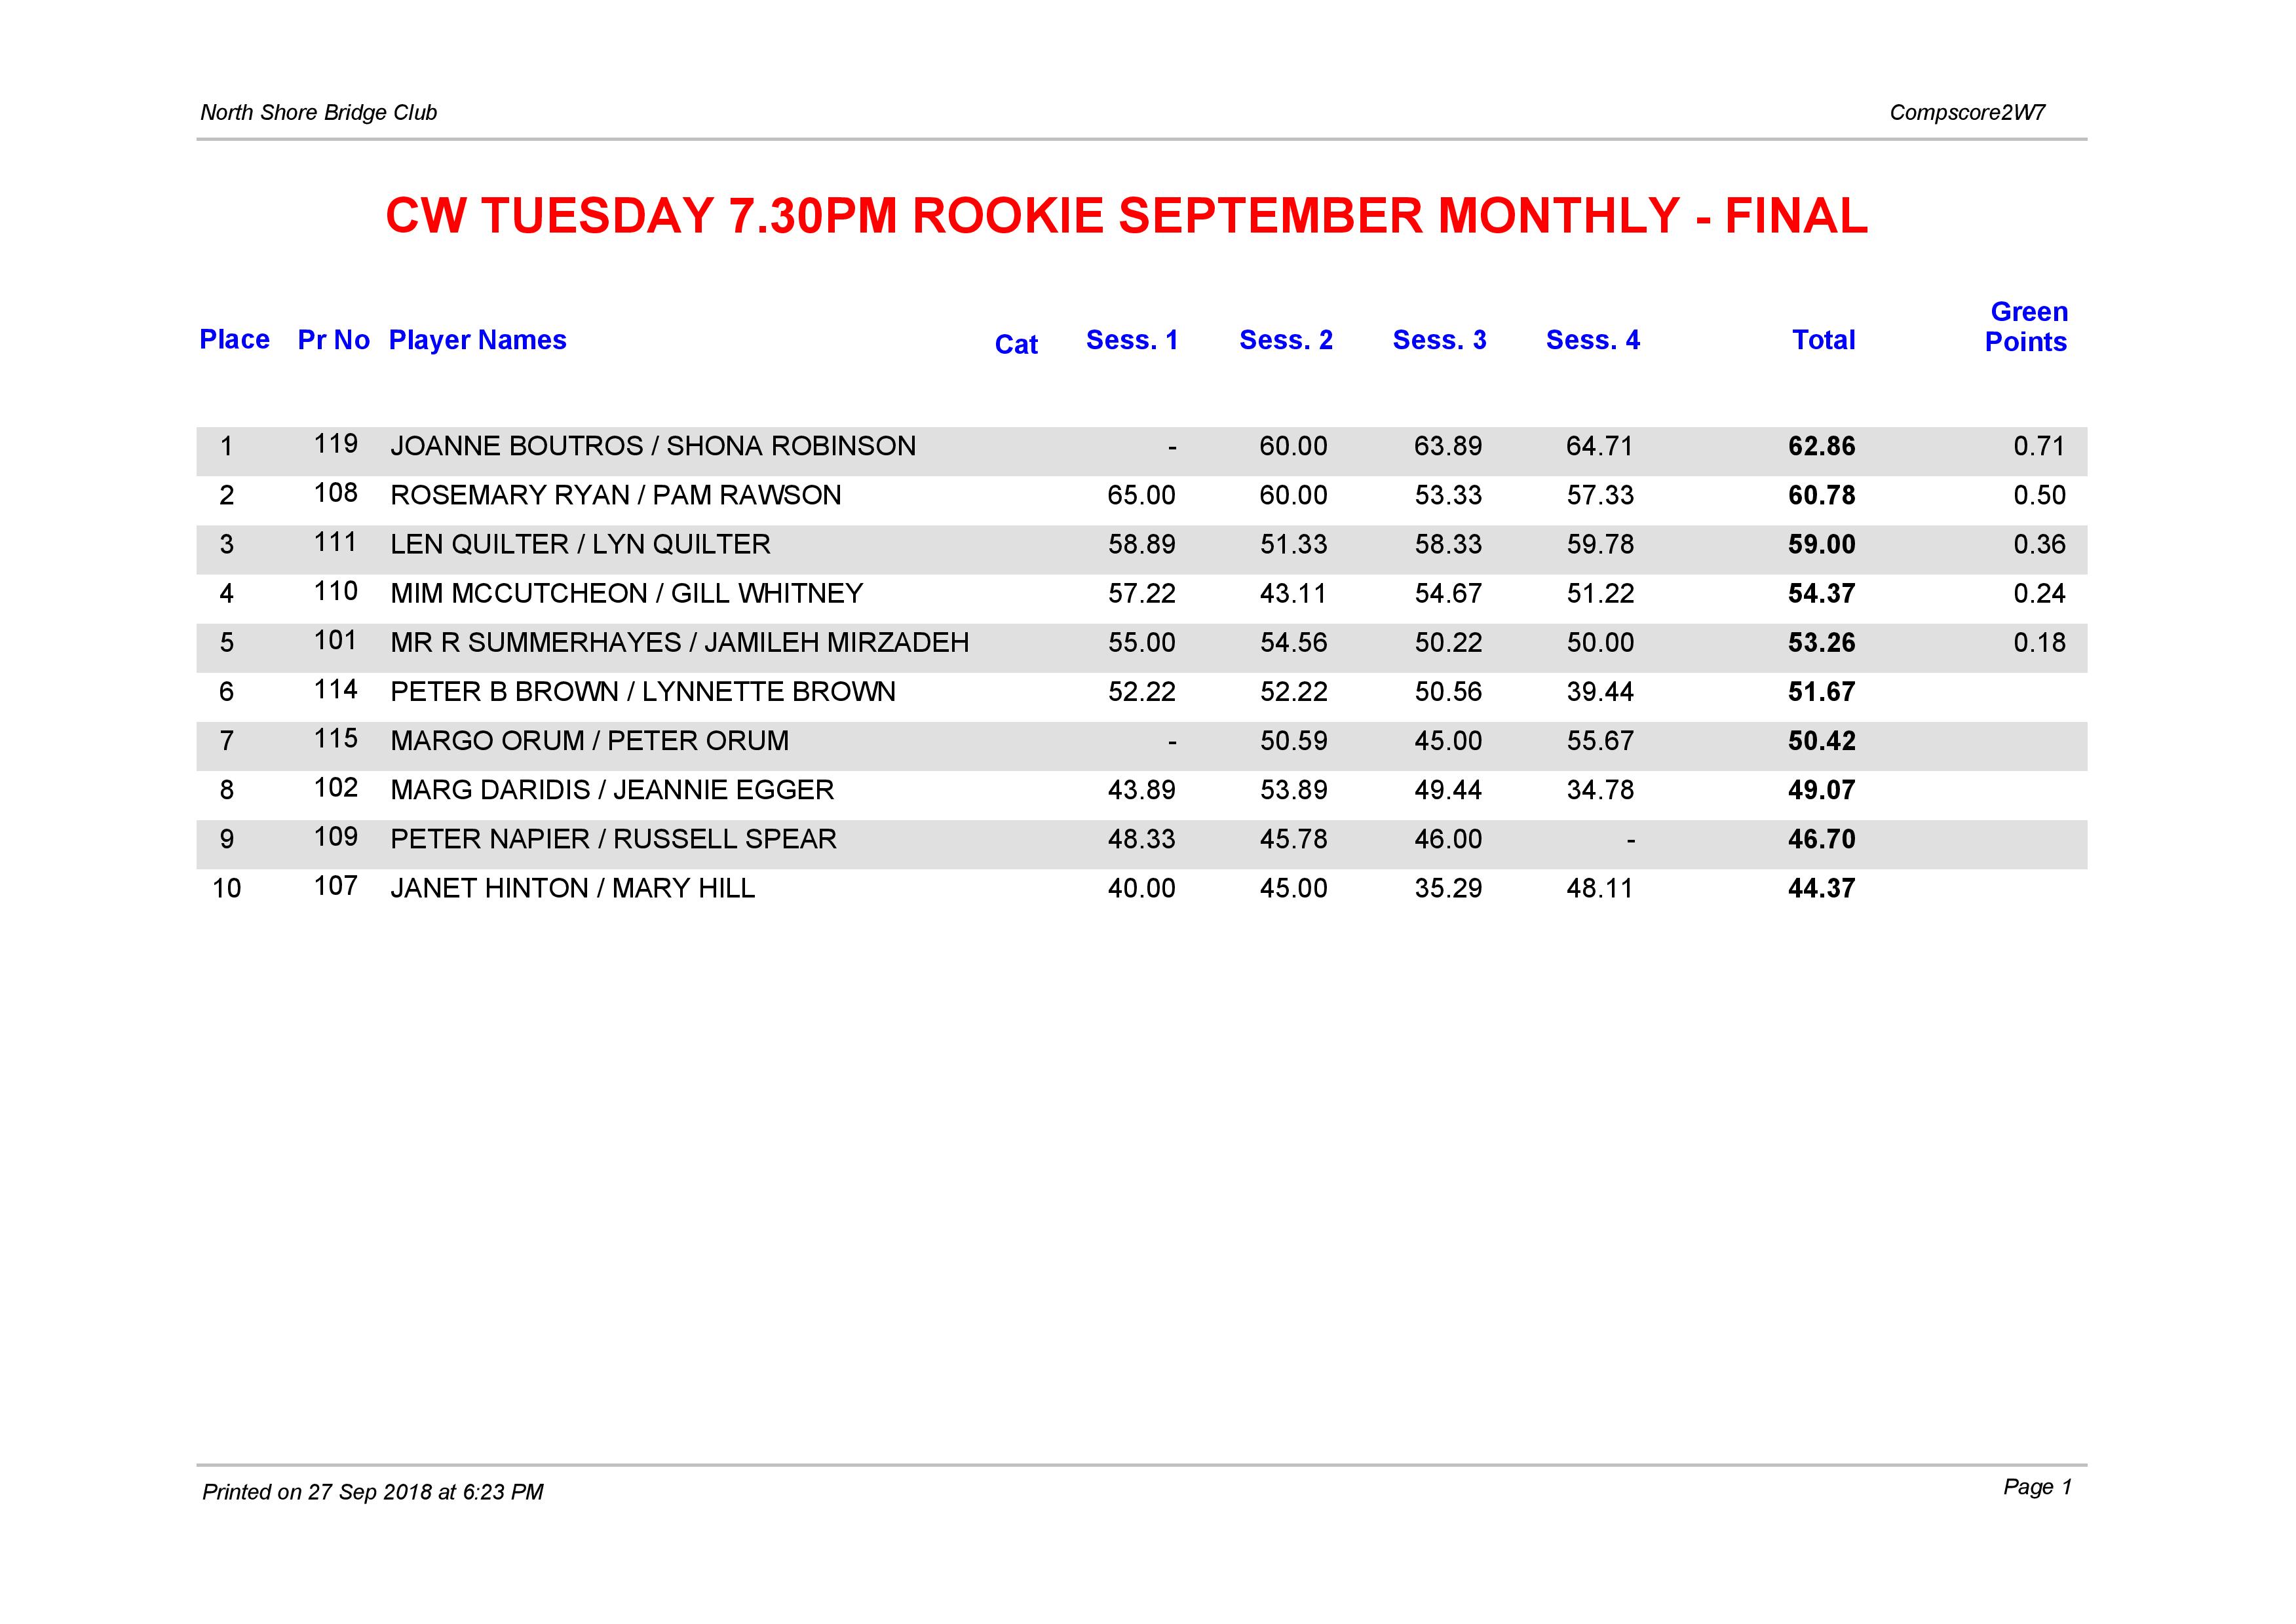 CW Tuesday 7.30pm Rookie September Winners